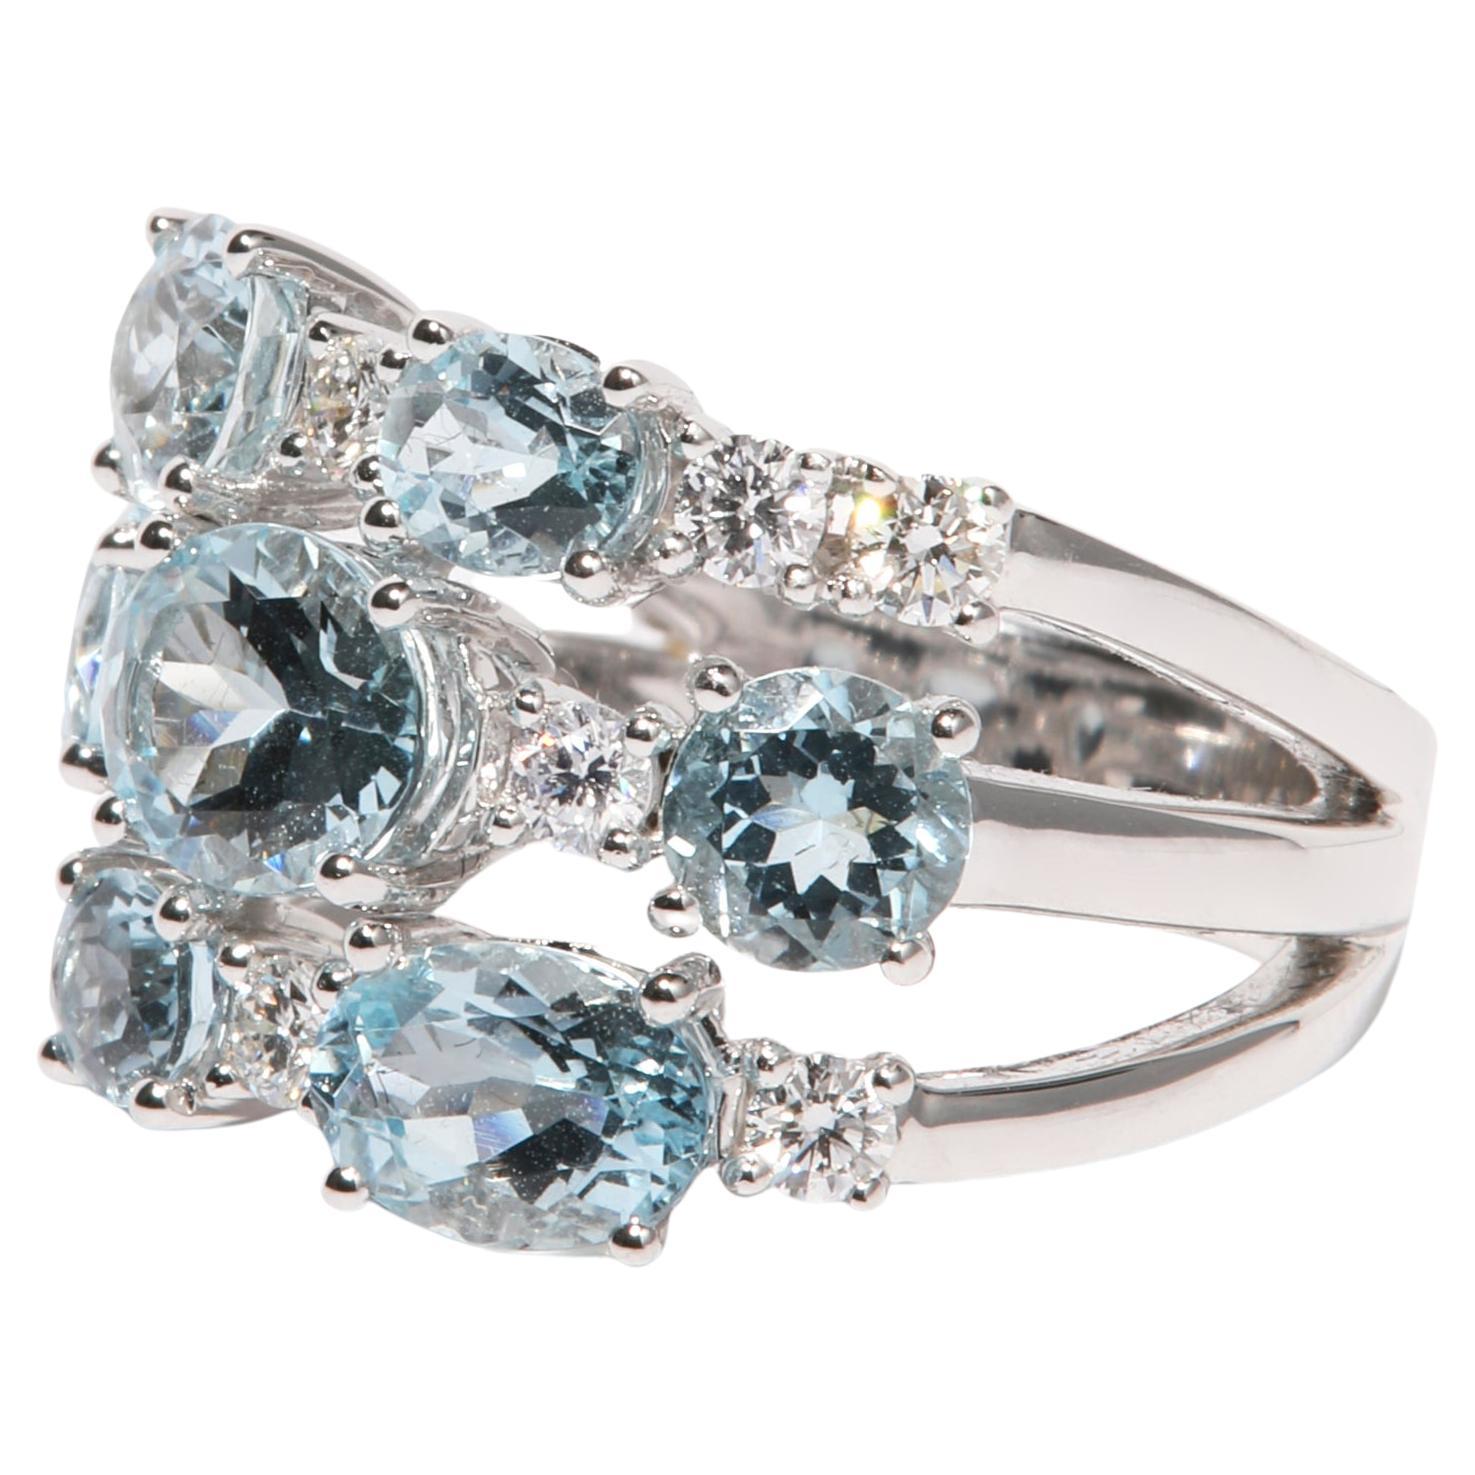 18 karat white gold ring is set with round and oval cut aquamarine a total of 3.89 carat of gemstones. Sparkly brilliant cut diamonds, a total of 0.60 carat, are set in between the lightblue soft tones, creating a wonderful festive ring for every